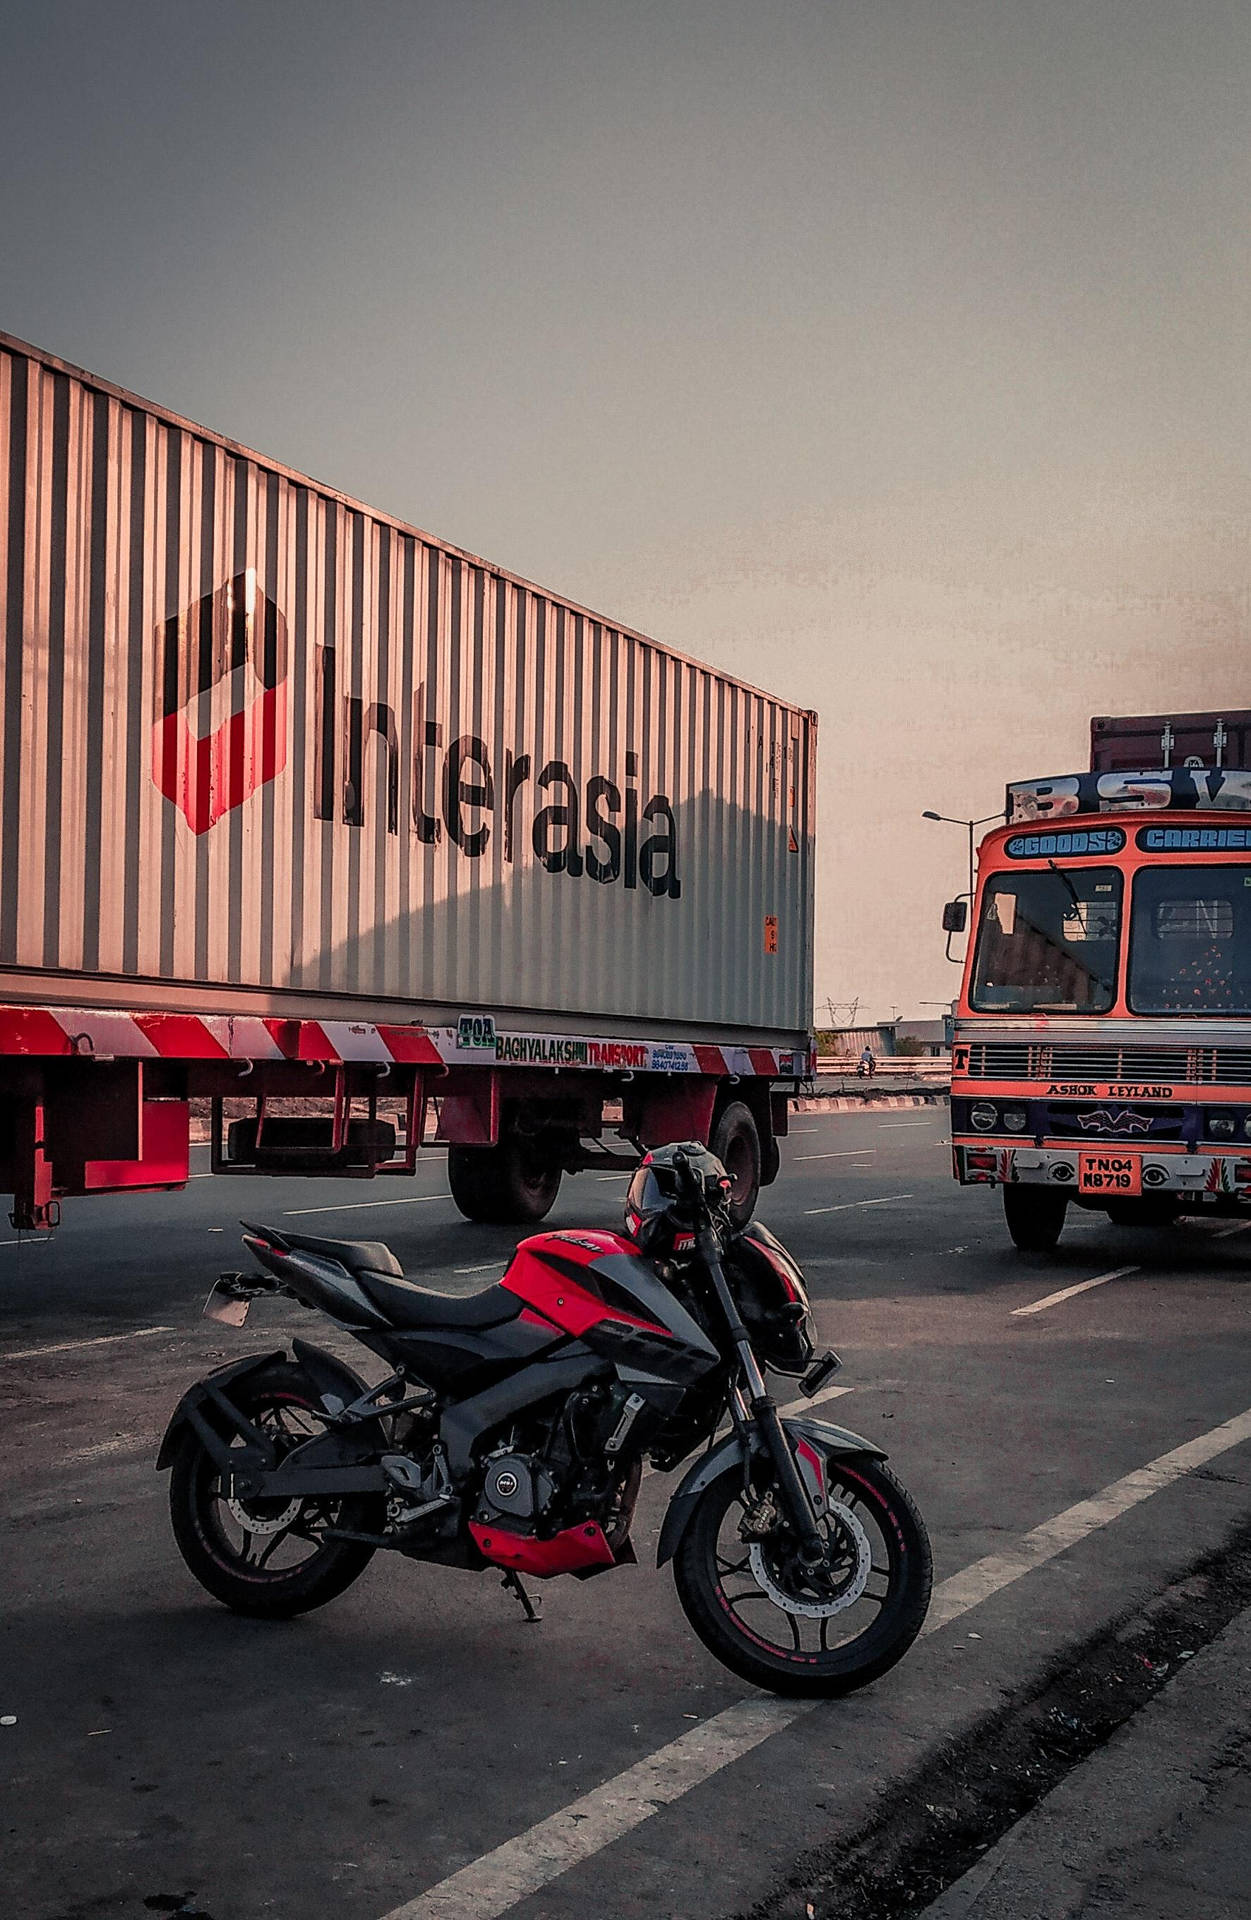 Ns 200 Black And Red Motorcycle Near Truck